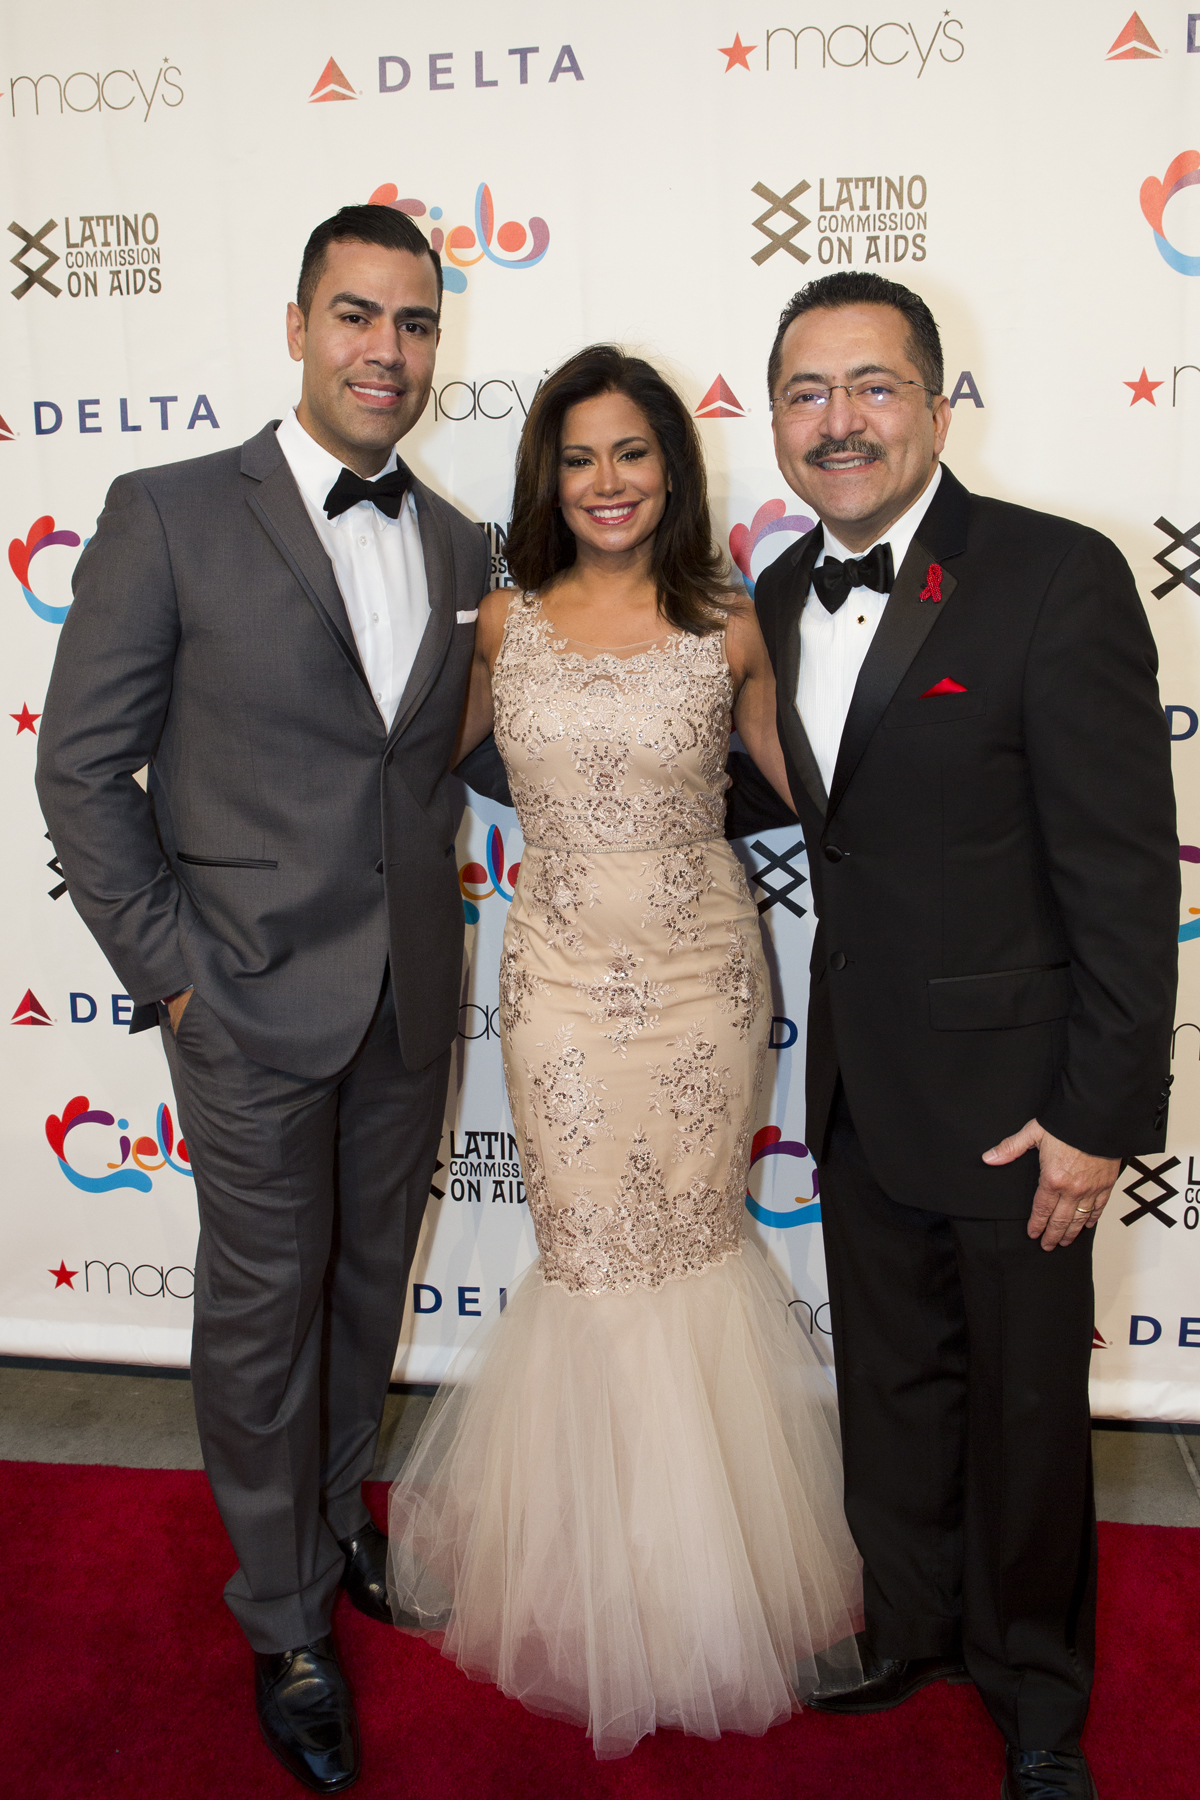 Co-hosts, actor JW Cortez and NBC4 anchor Sibila Vargas with Latino Commission on AIDS President Guillermo Chacón